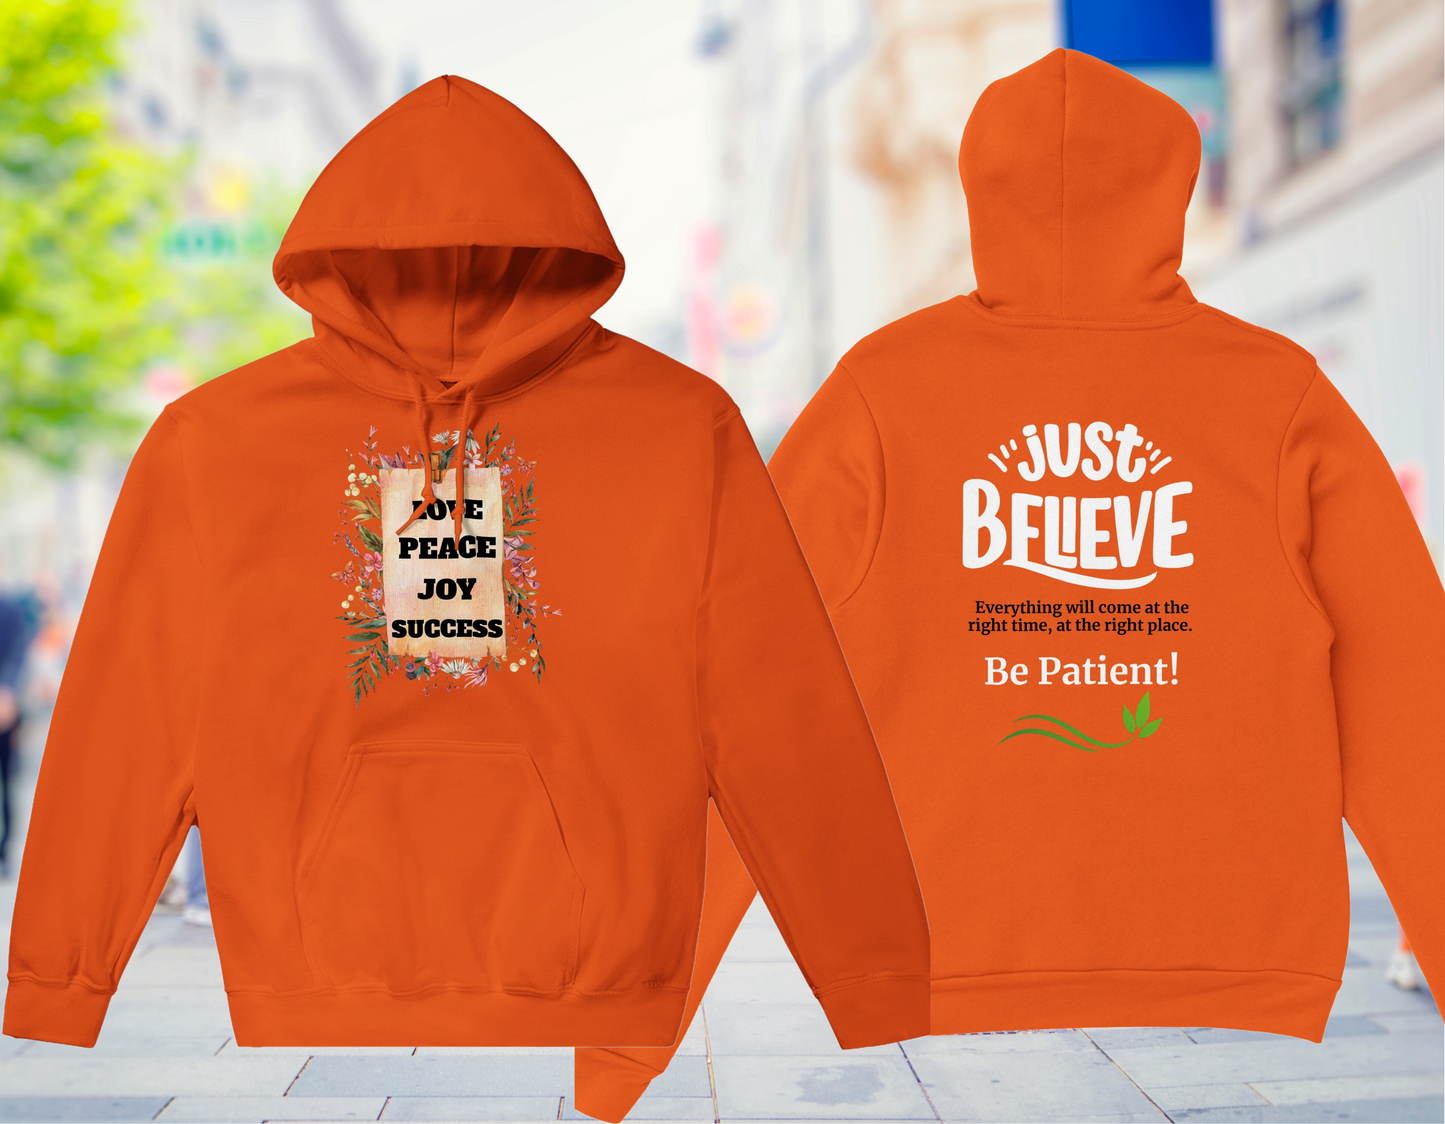 Cottagecore Unisex Hoddie, with positive Words: Love, Peace, Joy and Success. In the back: Just Believe everything will come at the right time and the right place. Be patient!Positive Quote Top, Vintage Jumper Gift Idea - orange hoodie